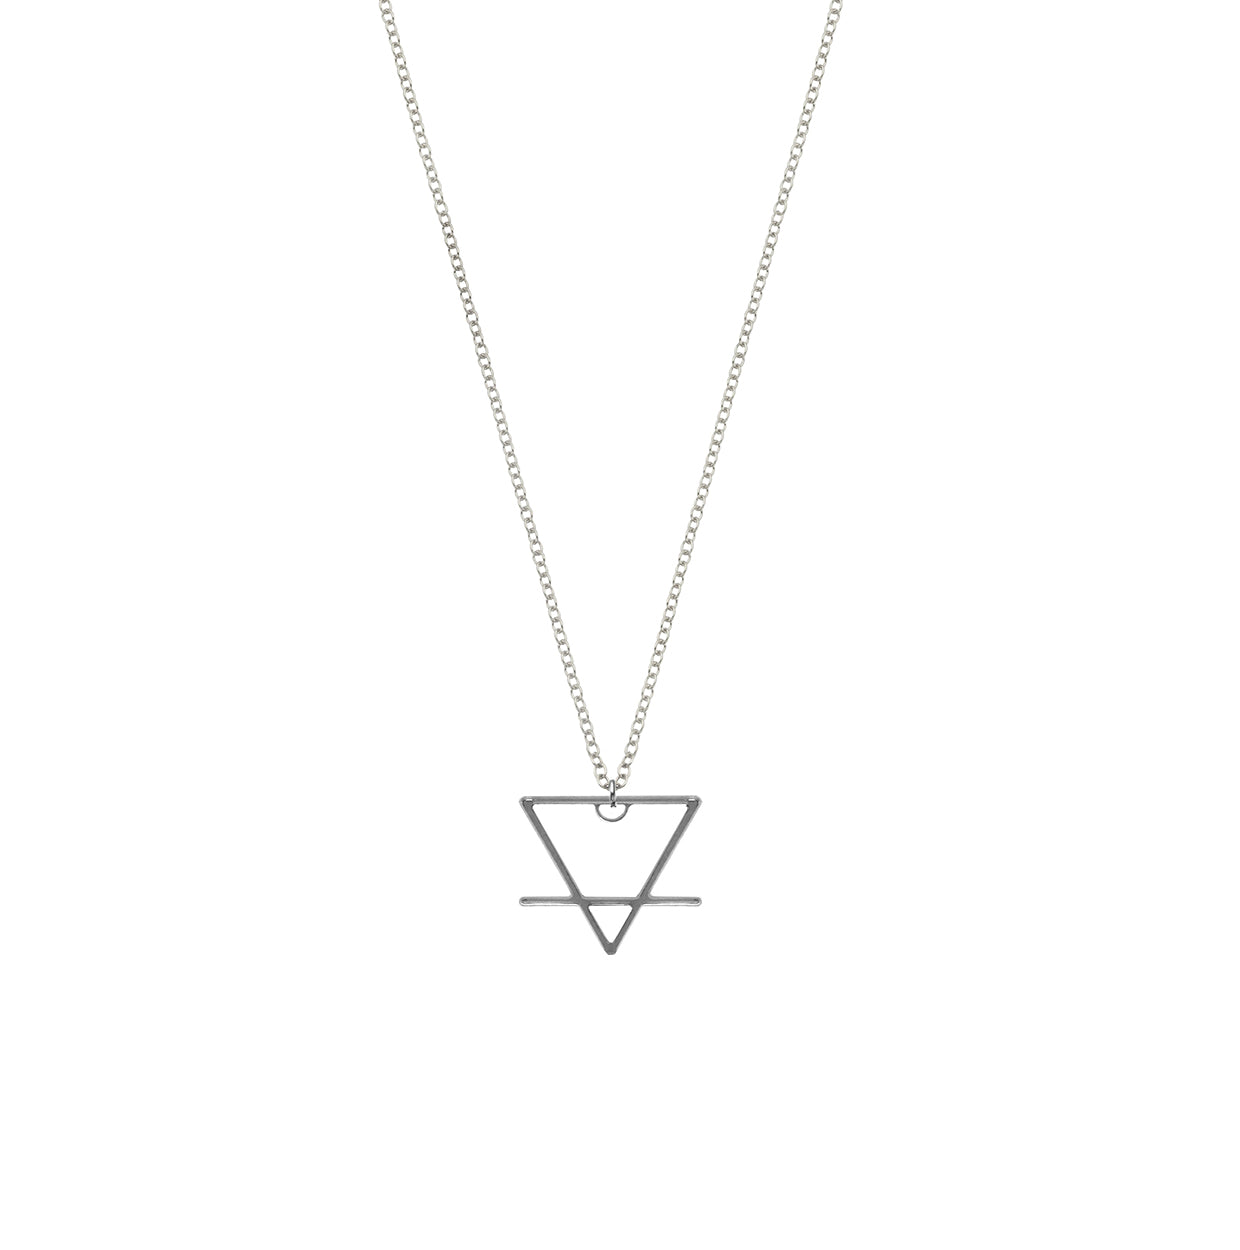 Earth Sign Element Necklace | Simple Triangle Necklace